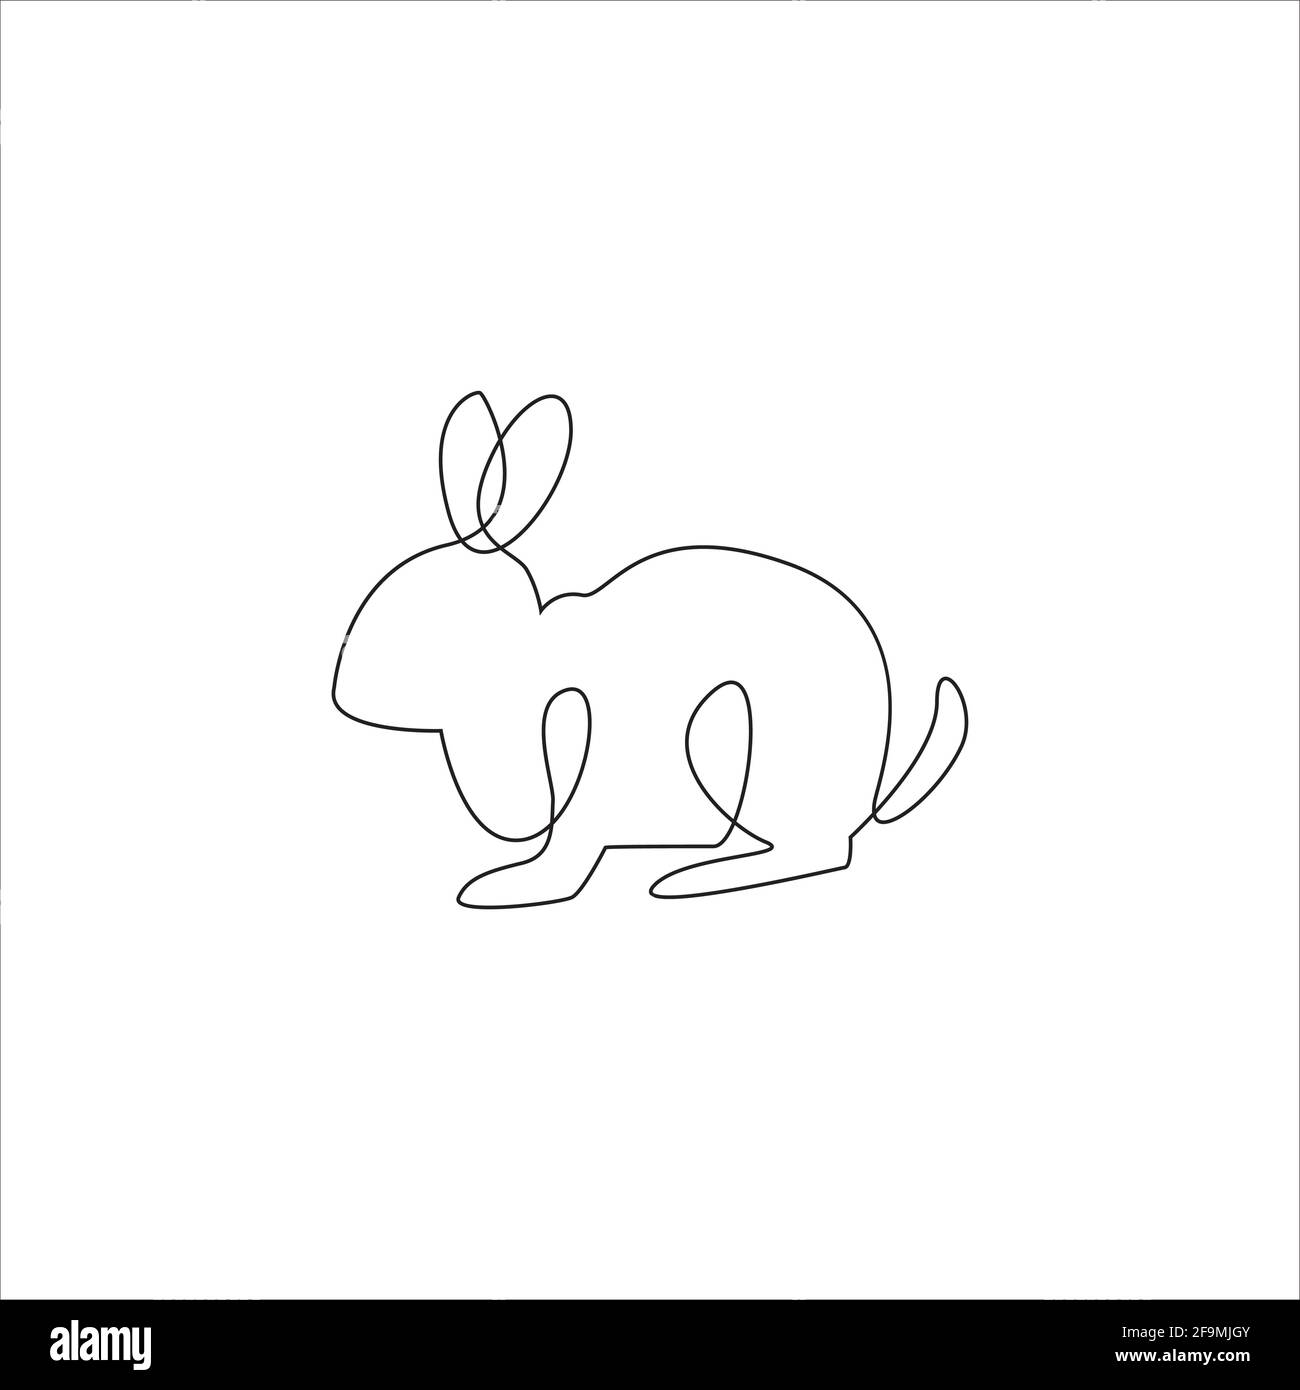 Black and white tattoo art with rabbit silhouette Vector Image